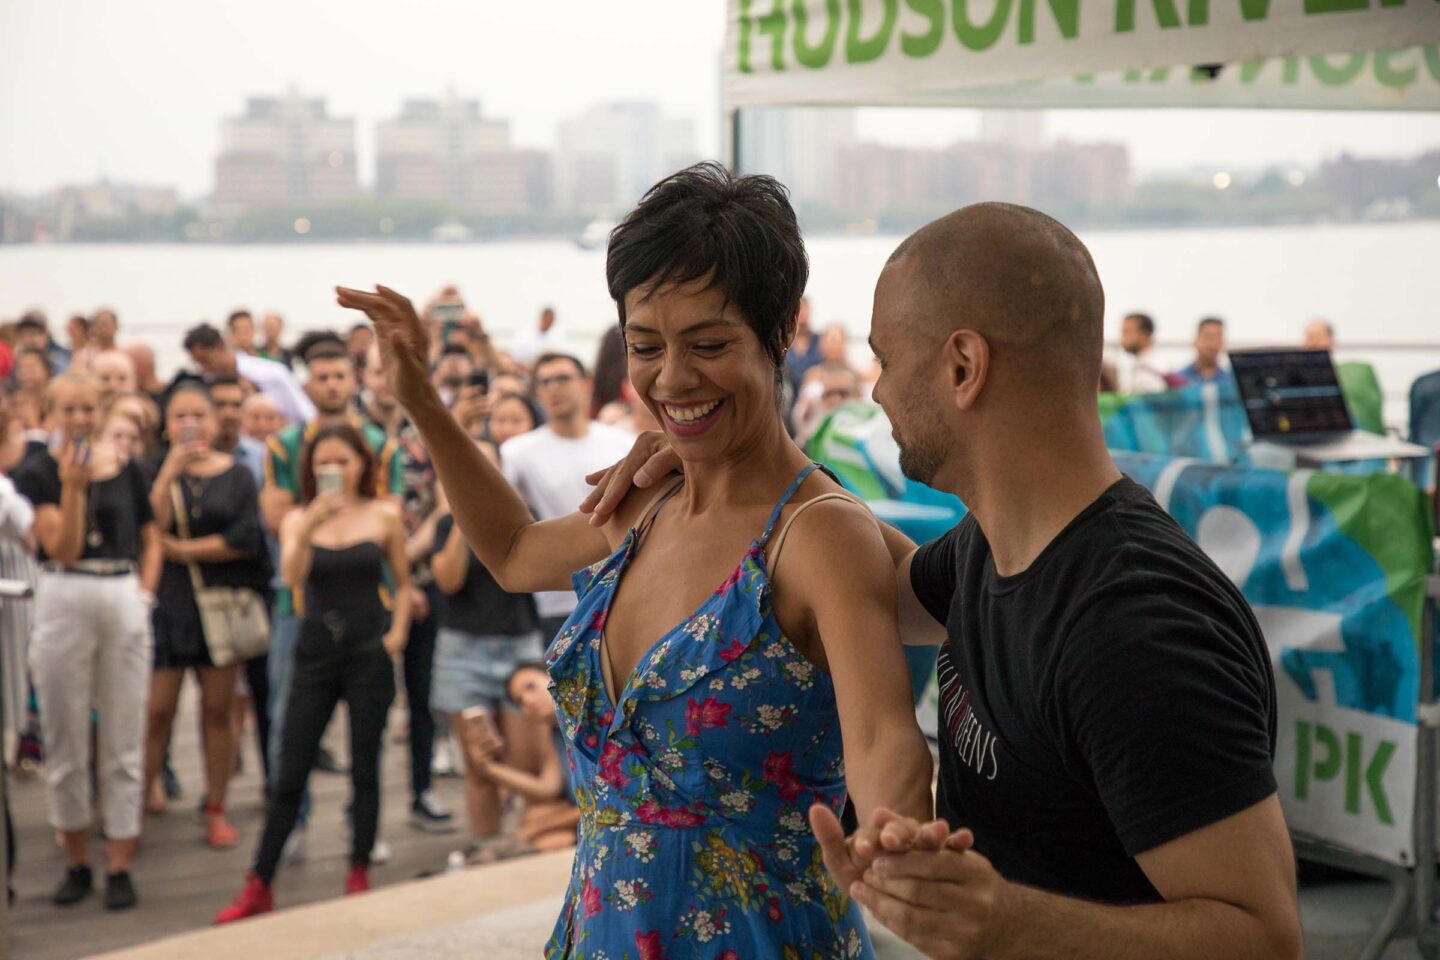 Talia smiles and prepares to turn during a salsa dance demonstration